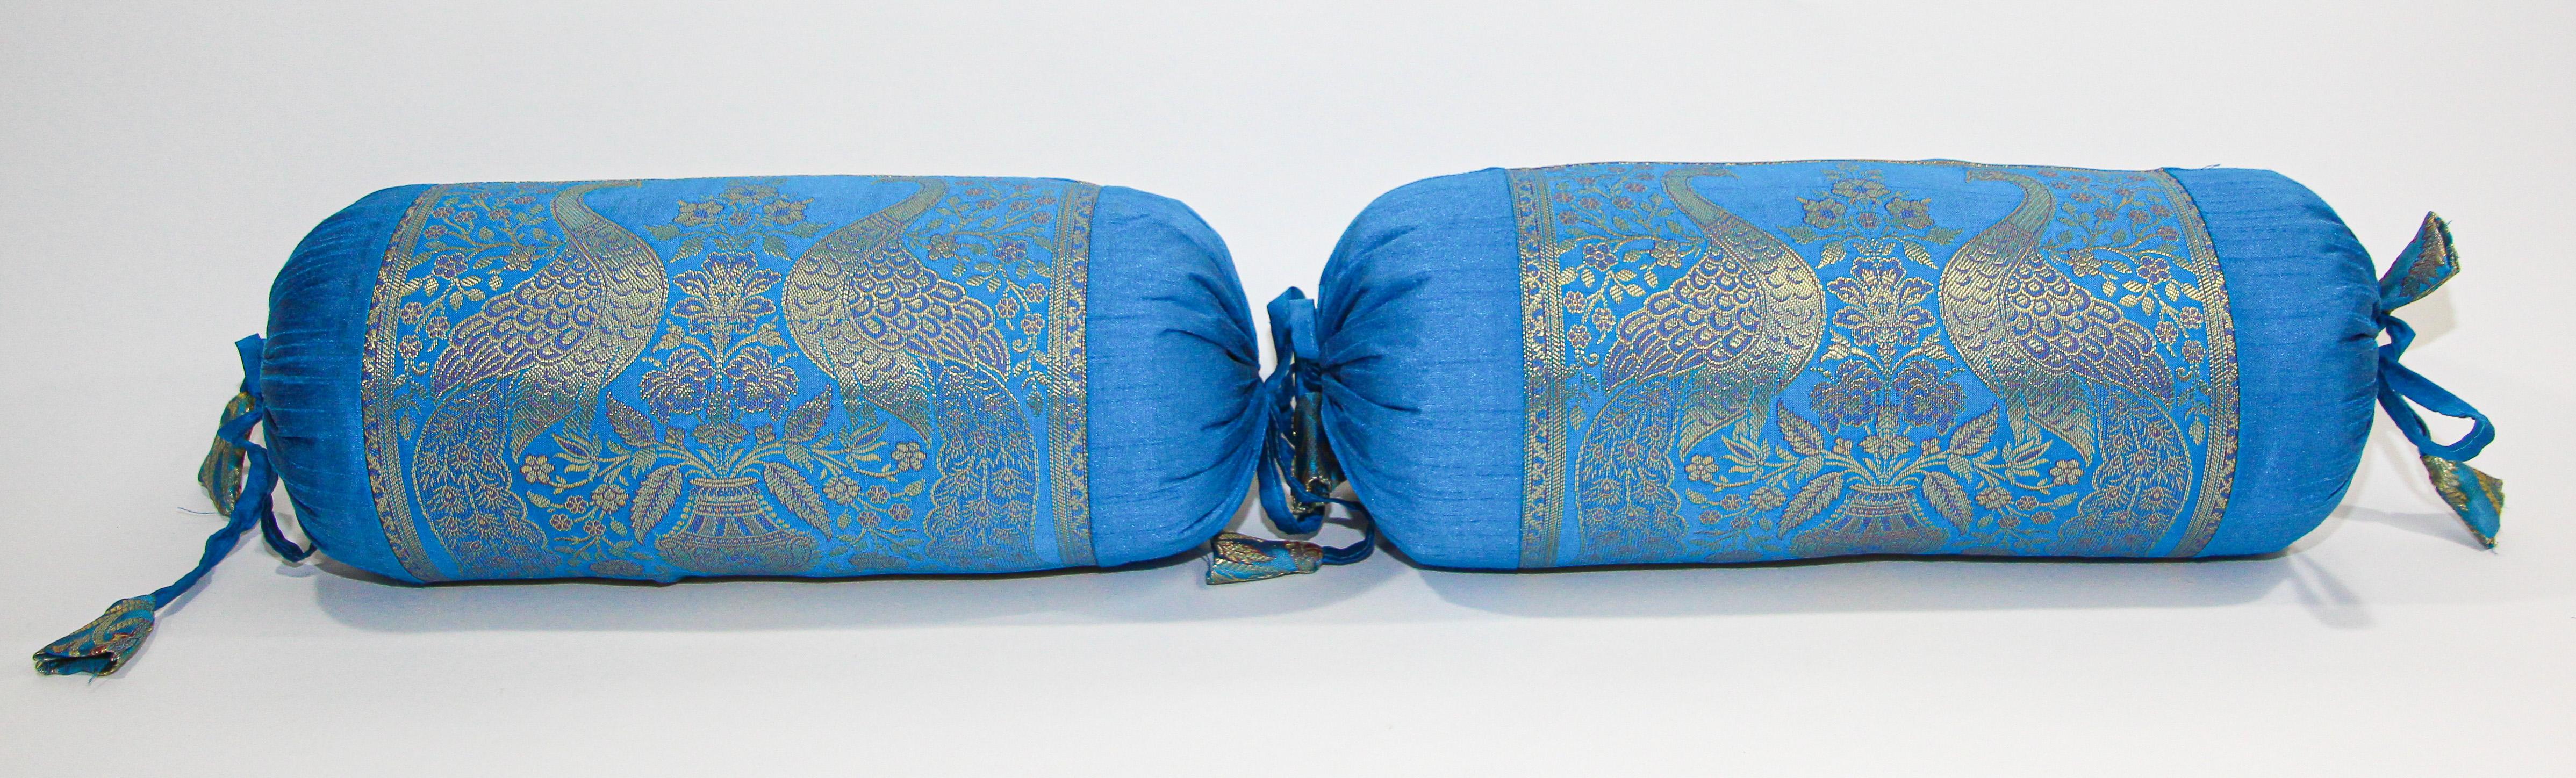 Vintage Brocade Silk Bolster Pillows Turquoise Blue and Gold Colors with Peacock For Sale 8